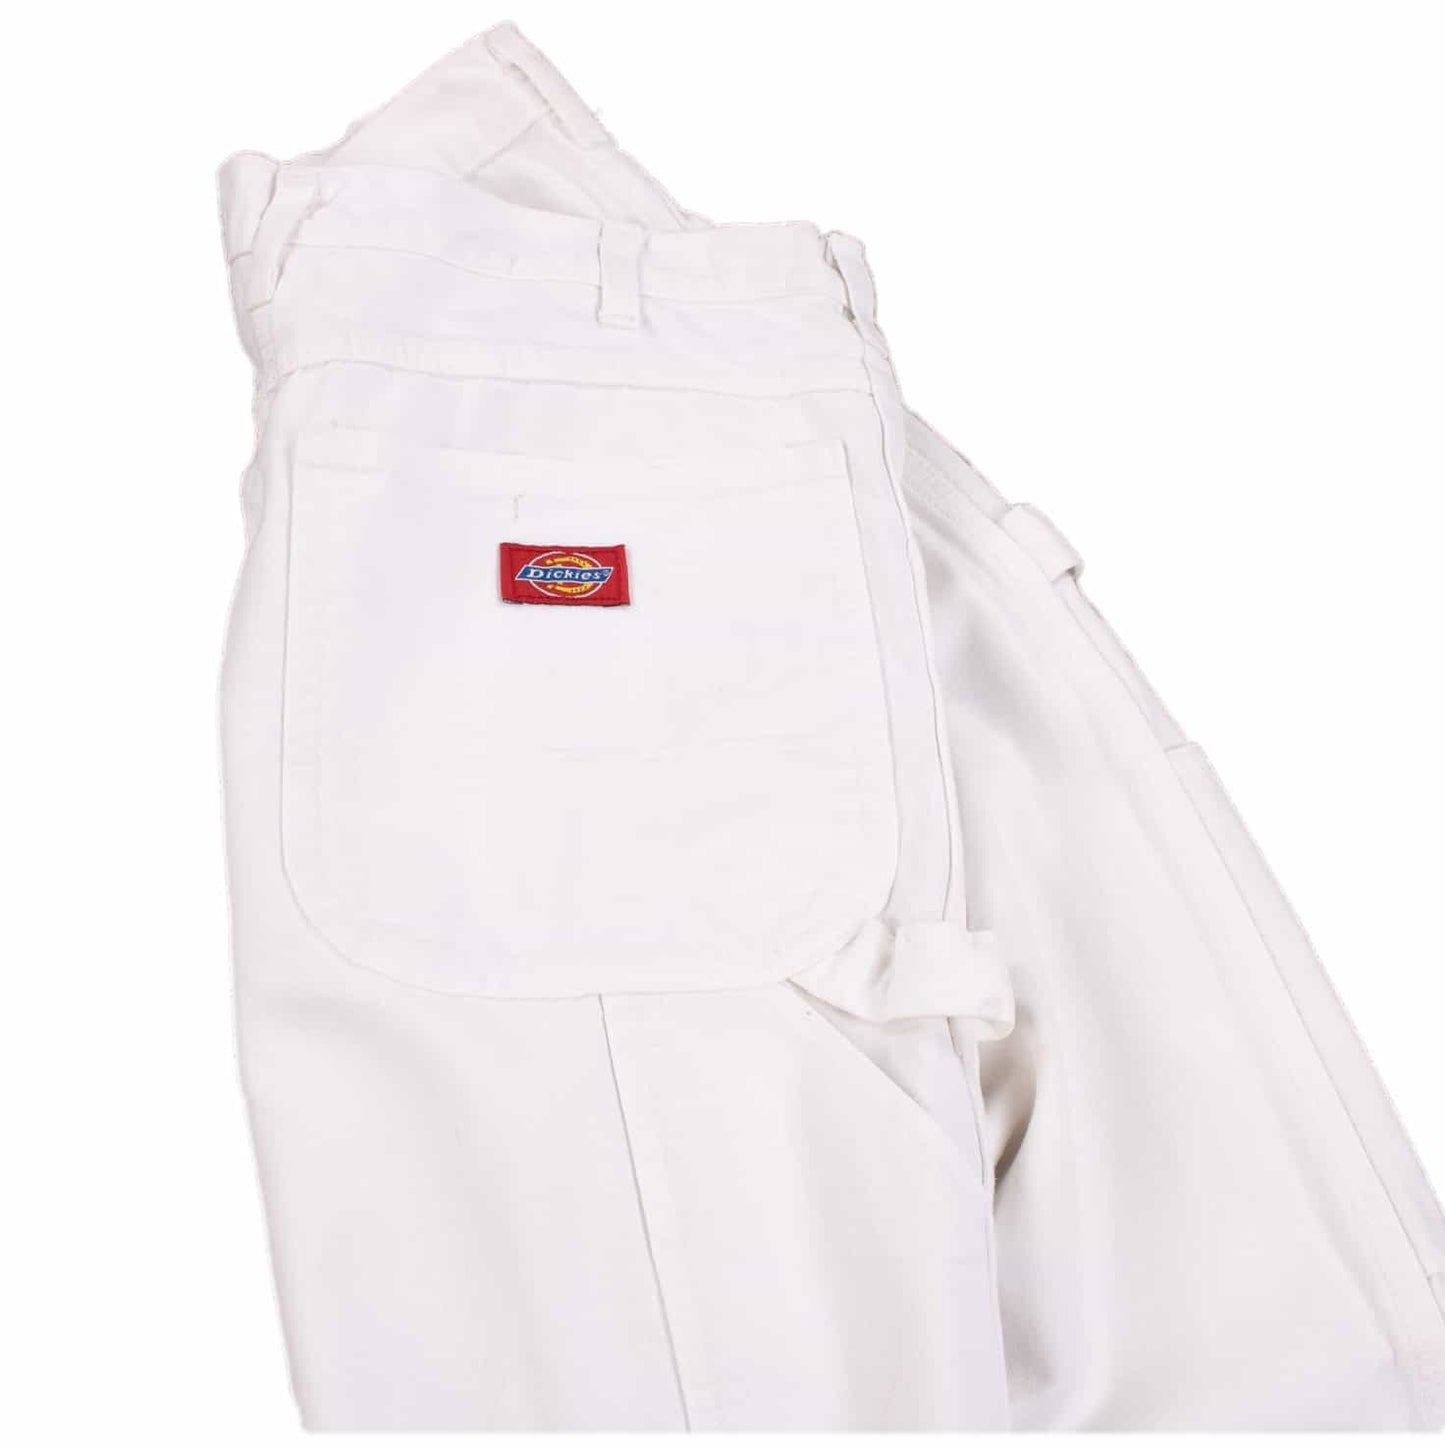 Vintage Dickies Carpenter Pants - White - American Madness